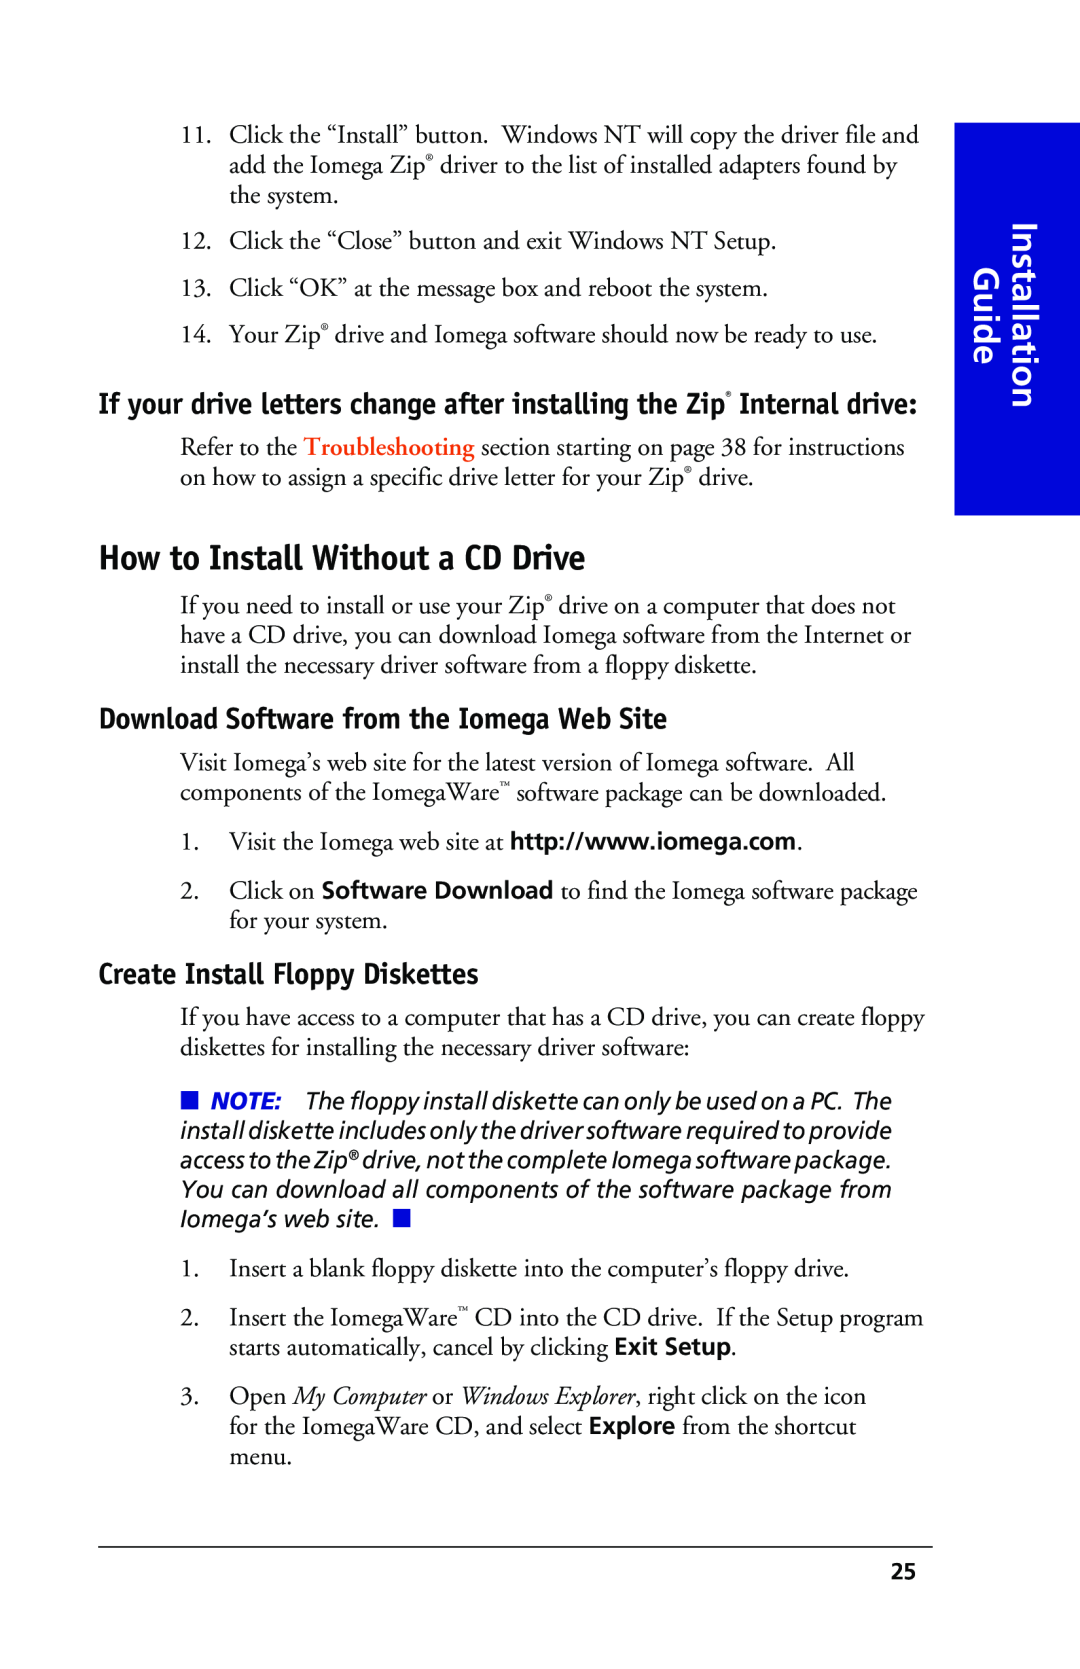 Iomega 03798300 How to Install Without a CD Drive, Download Software from the Iomega Web Site, Installation Guide 